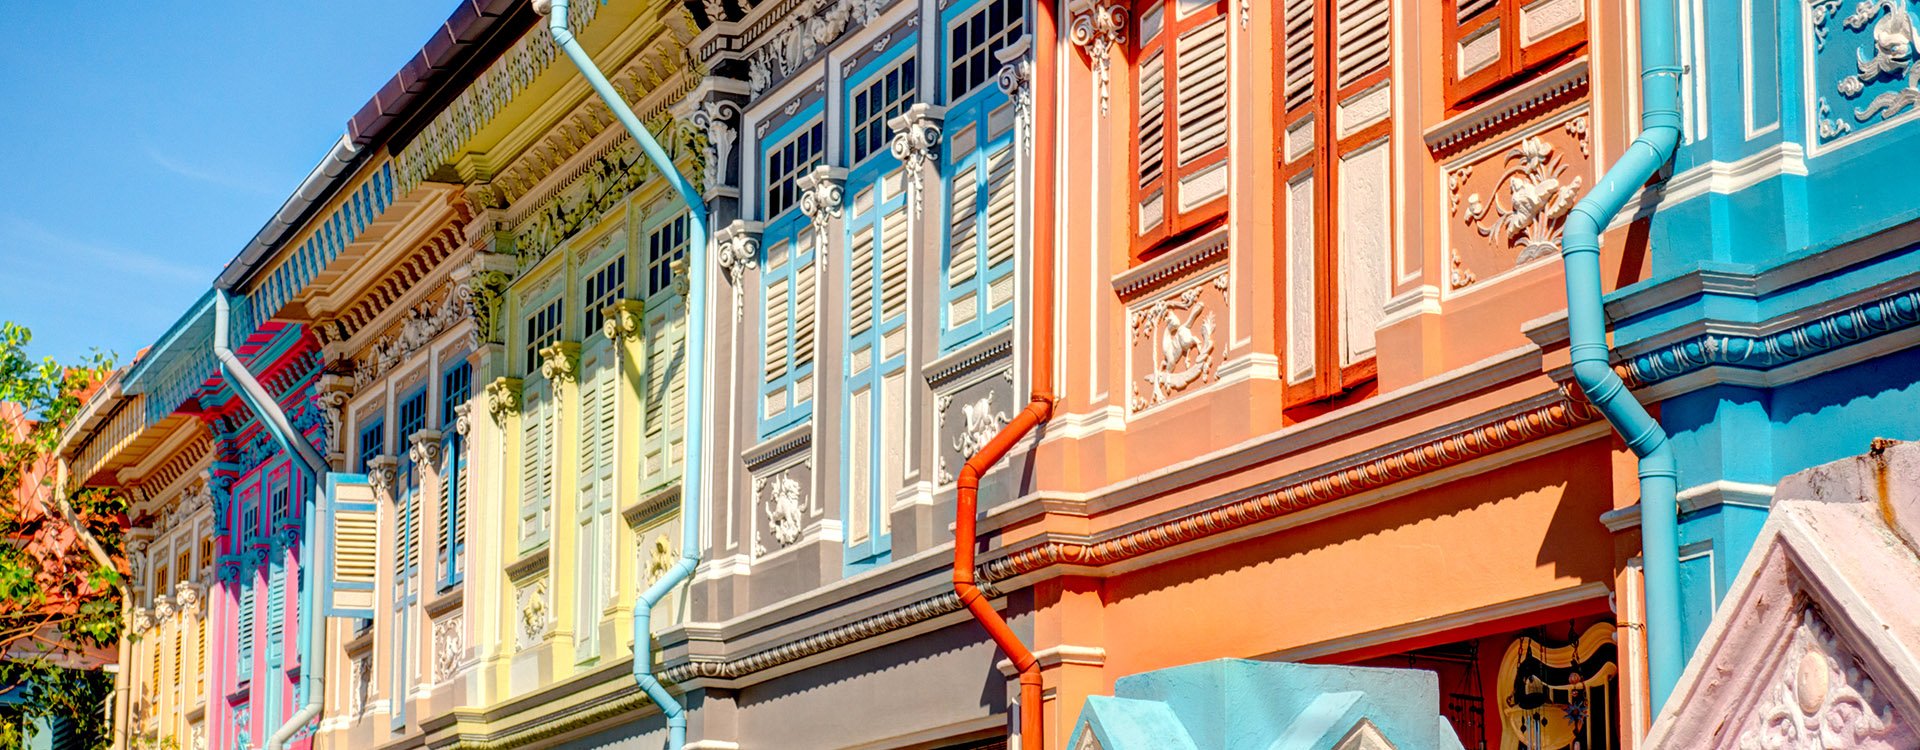 Singapore, colourful peranakan building shop houses in Joo Chiat Road district